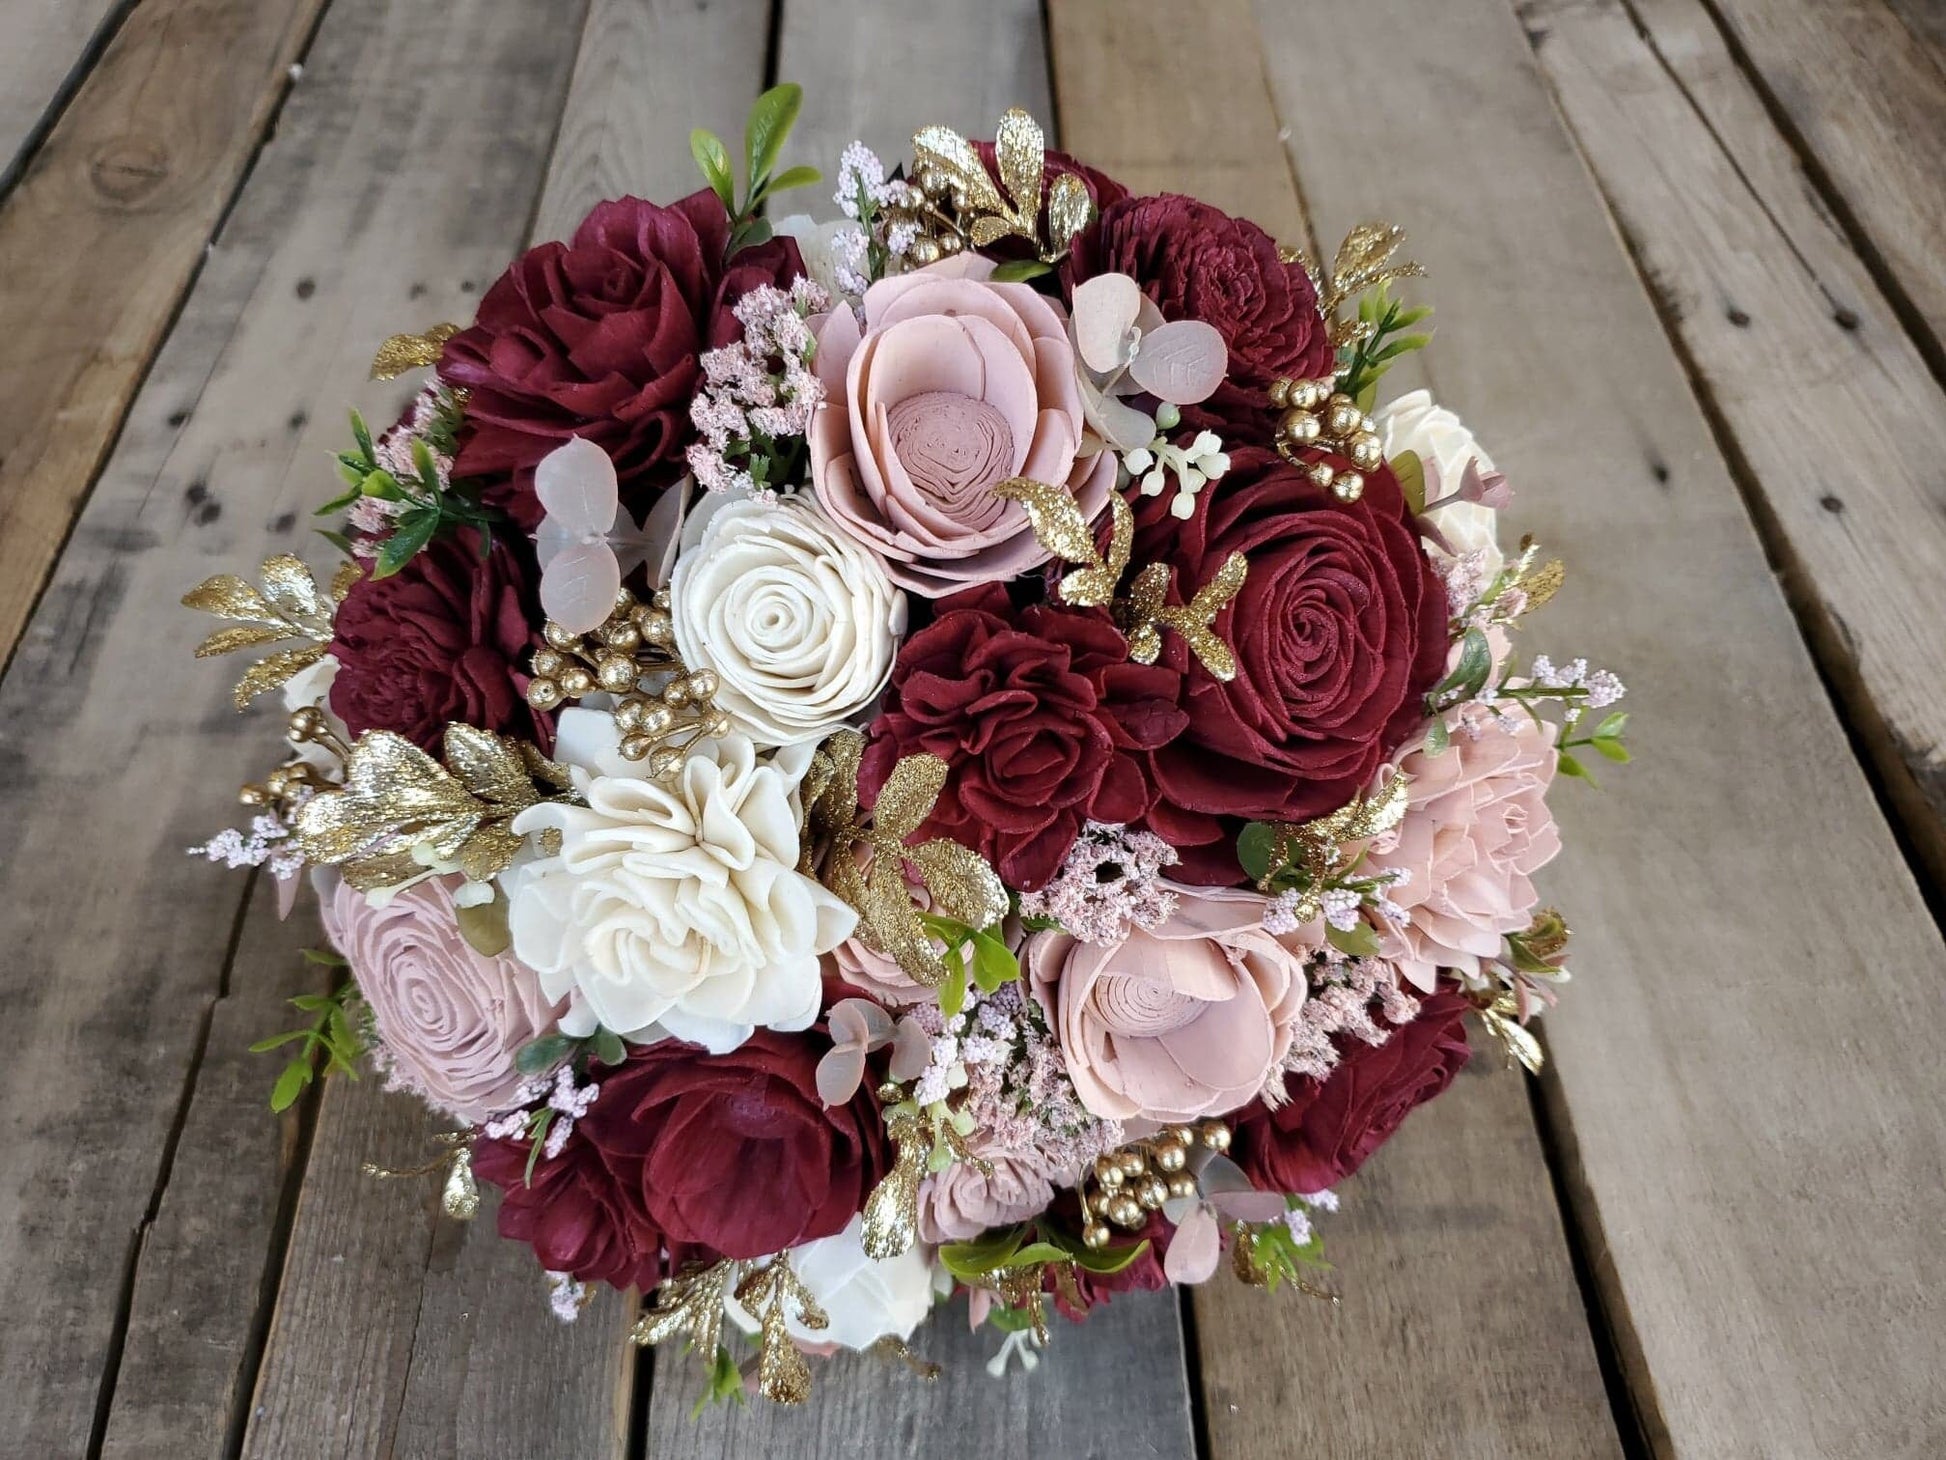 Burgundy, Blush, and Cream Wood Flower Bouquet with Gold Accents and Boxwood, bridal bouquet, bridesmaid bouquet, flower girl